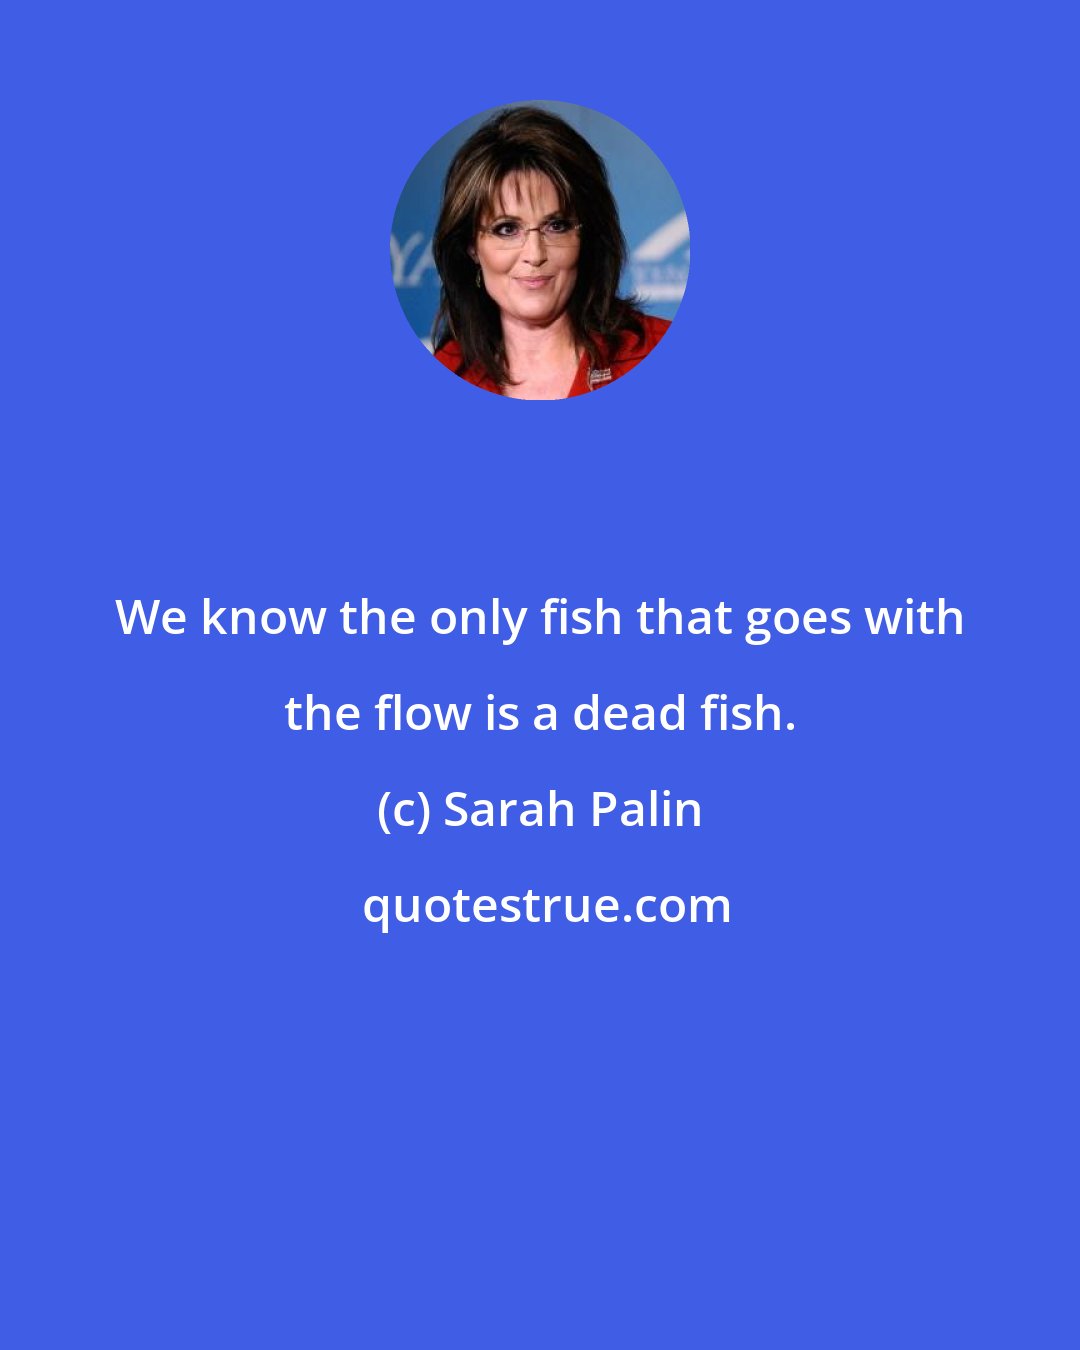 Sarah Palin: We know the only fish that goes with the flow is a dead fish.